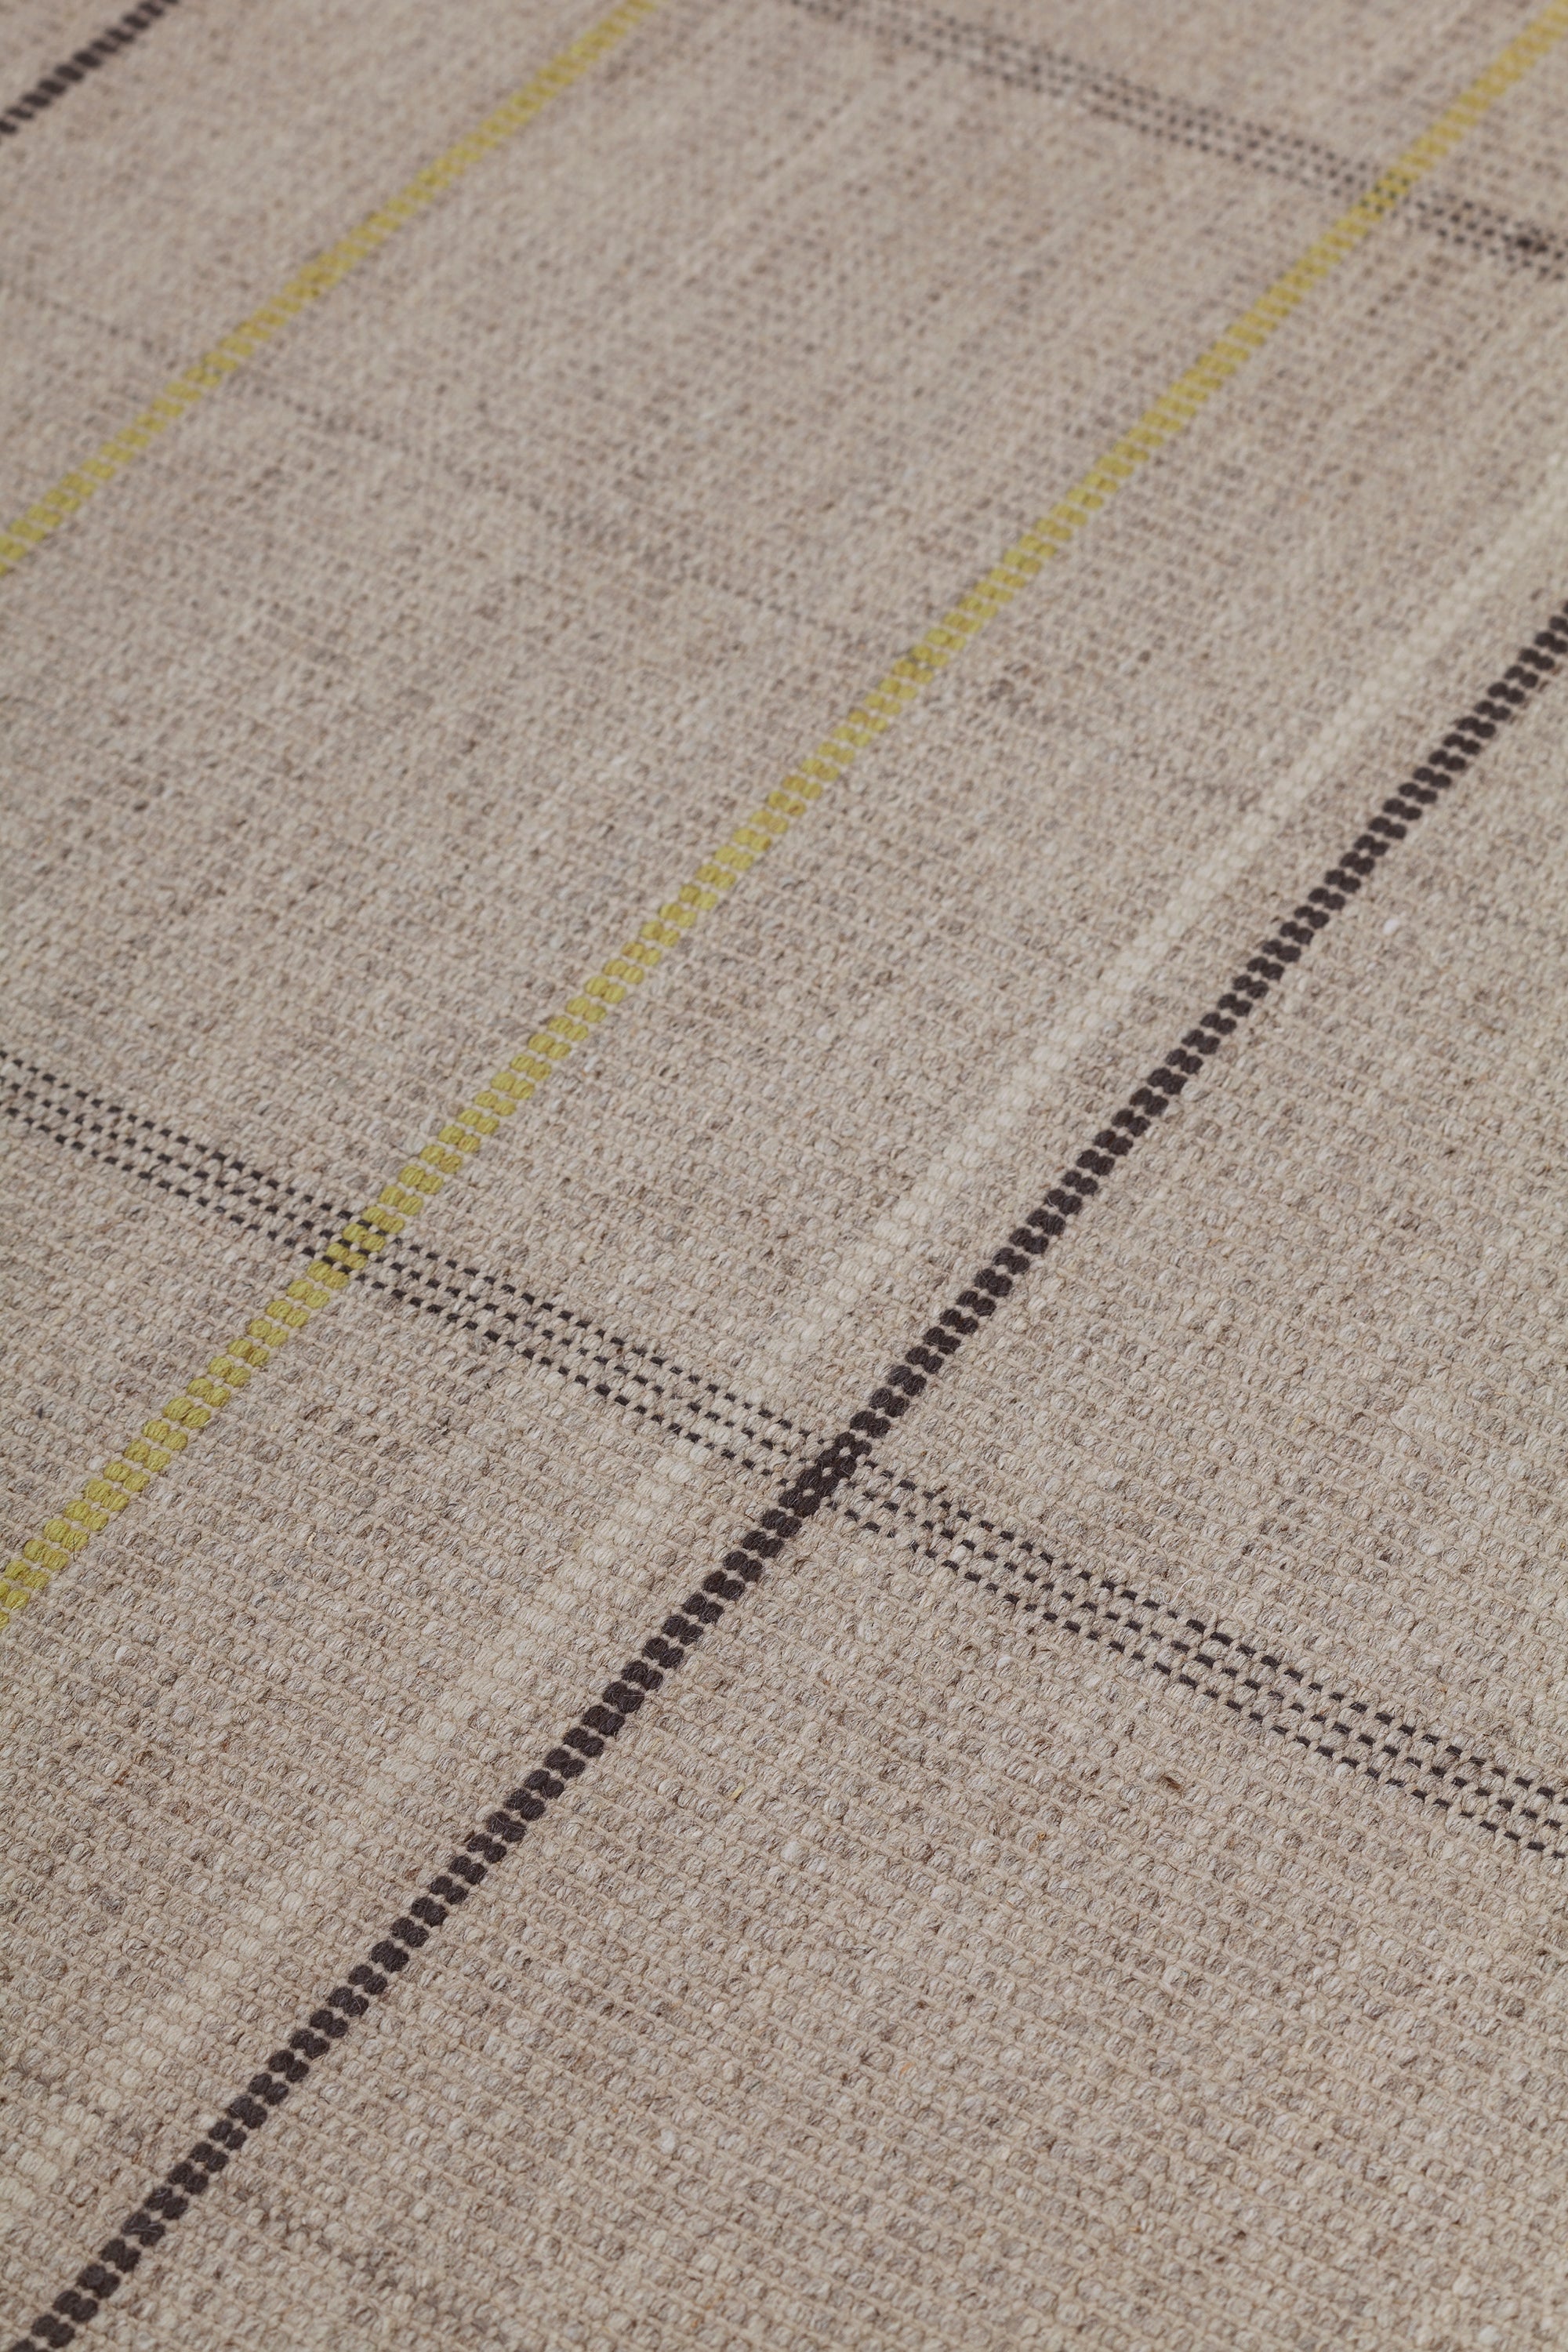 Detail of the Jasper Waffle Rug in Peridot, a large scale plaid pattern of ecru, yellow, grey and off white. 